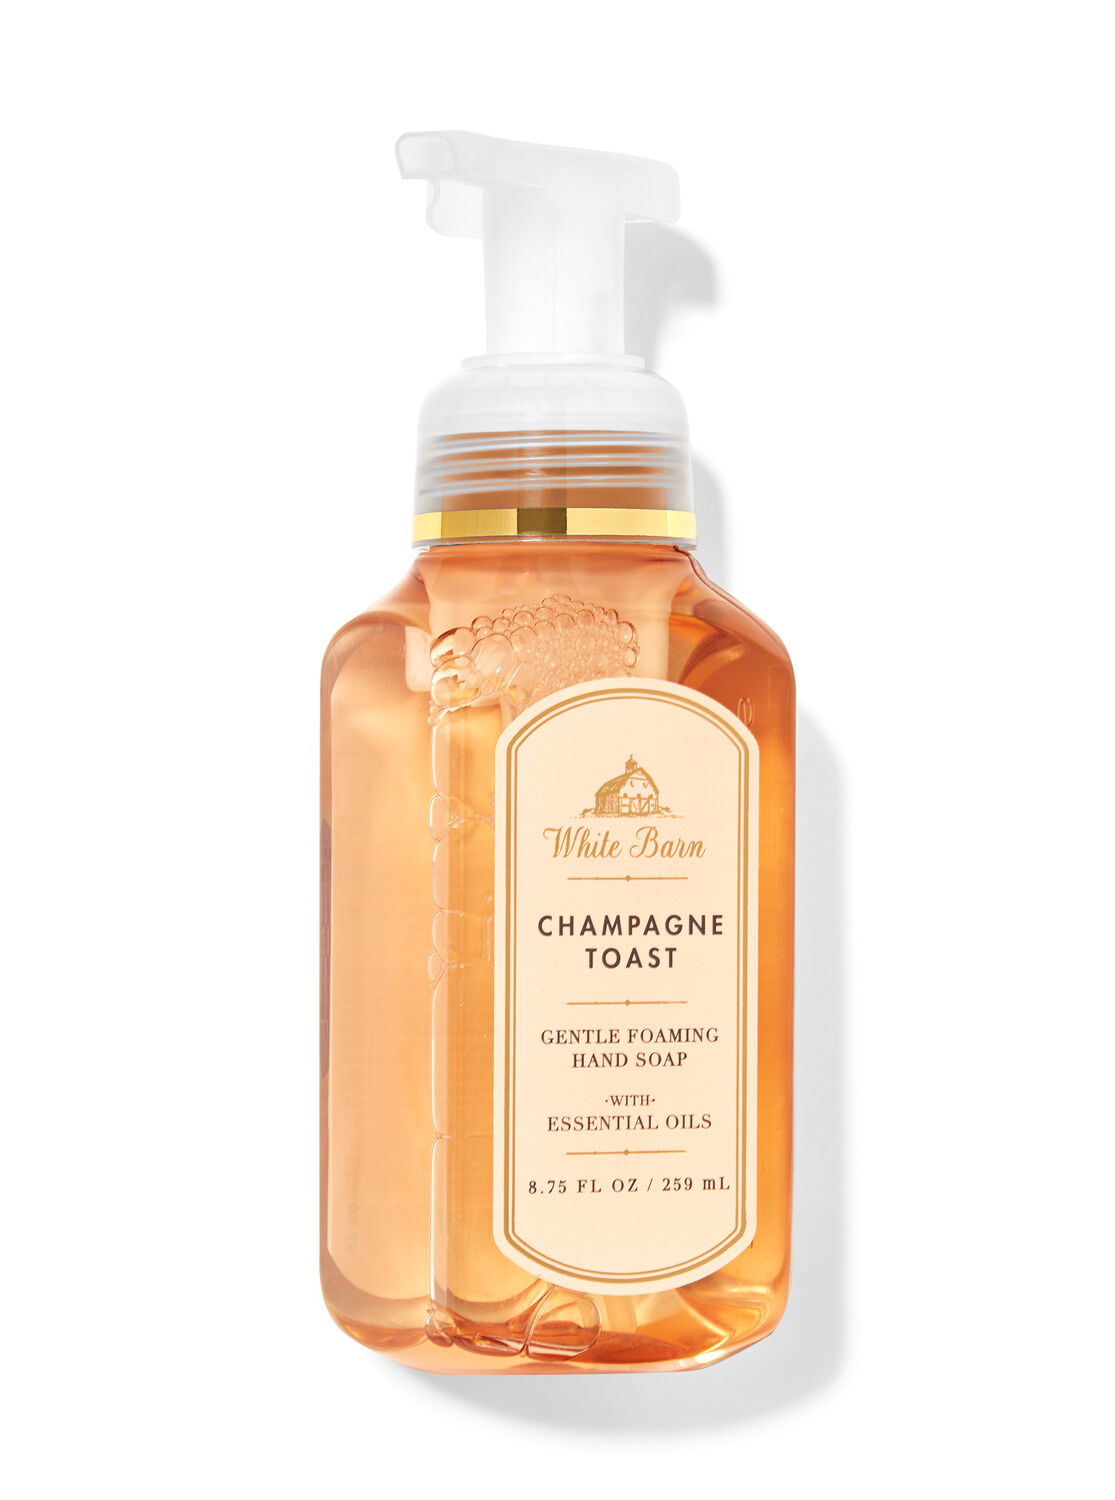 Champagne Toast Gentle Foaming Hand Soap